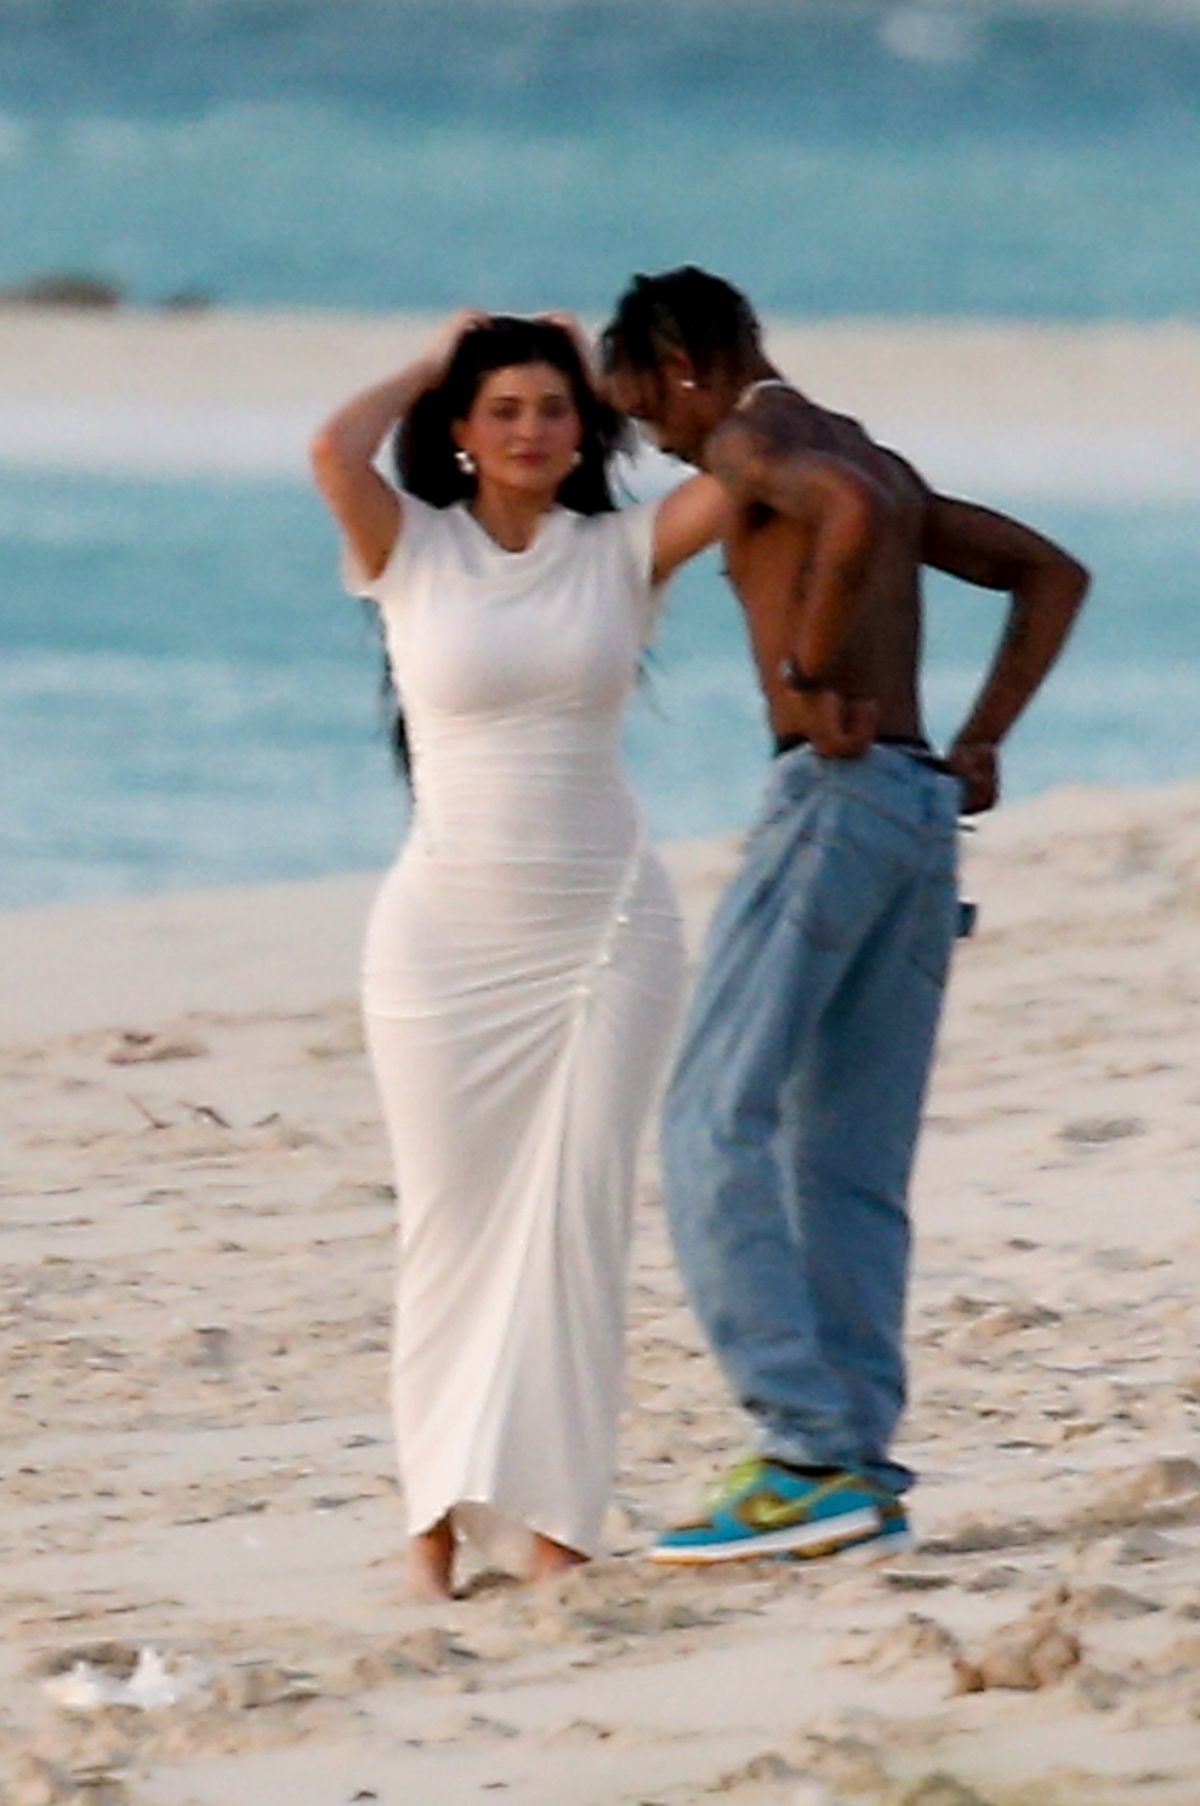 Kylie Jenner And Travis Scott In Romantic Sunset In Turks And Caicos 05032022 Hawtcelebs 